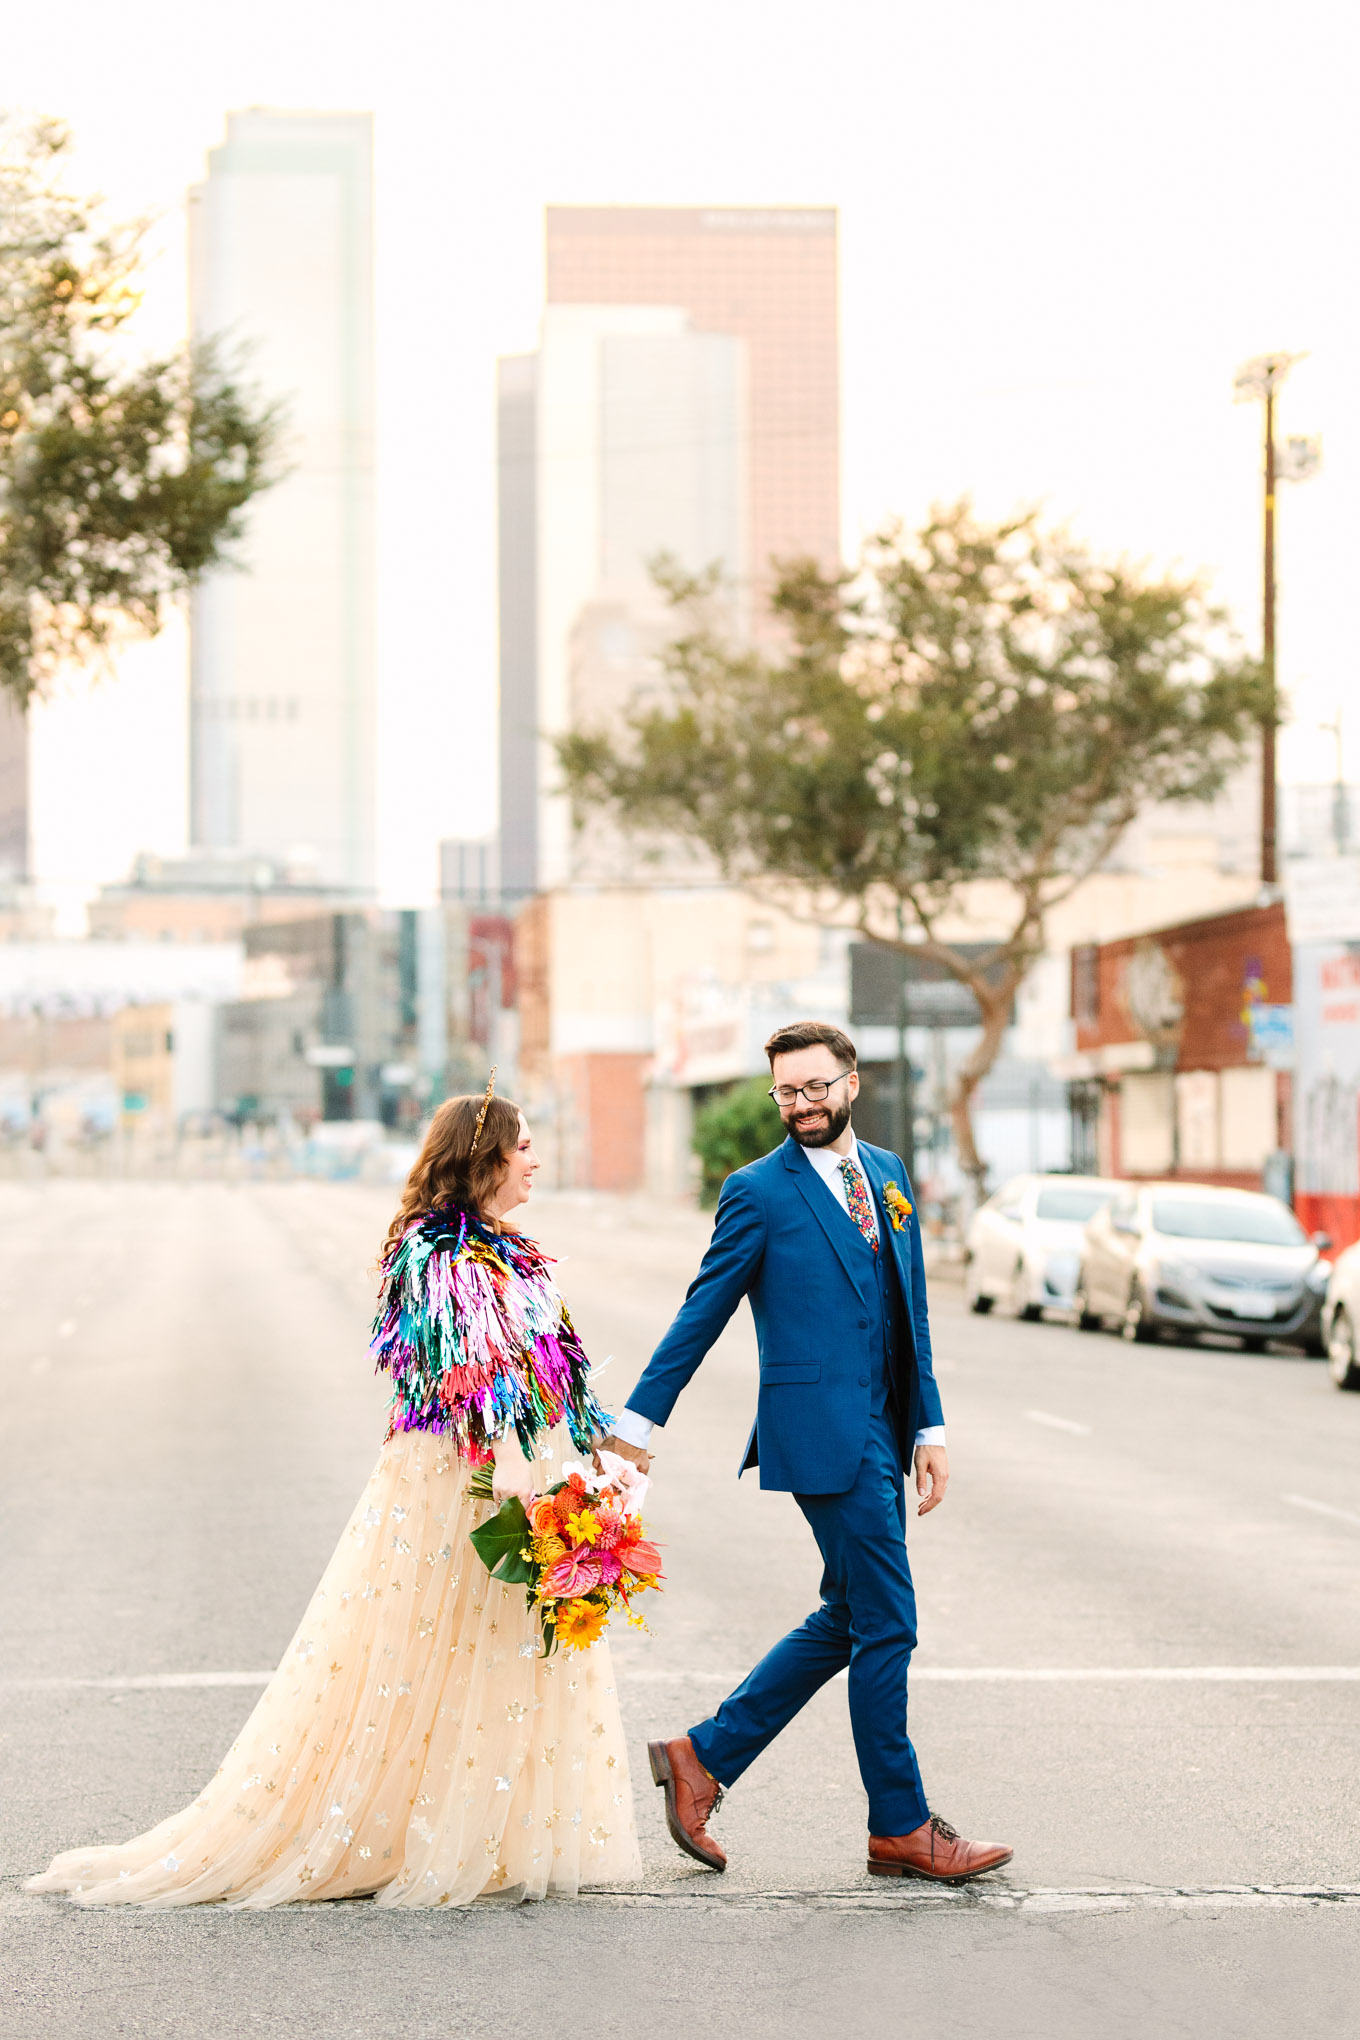 Bride and groom walking with LA skyline behind them | Colorful Downtown Los Angeles Valentine Wedding | Los Angeles wedding photographer | #losangeleswedding #colorfulwedding #DTLA #valentinedtla   Source: Mary Costa Photography | Los Angeles